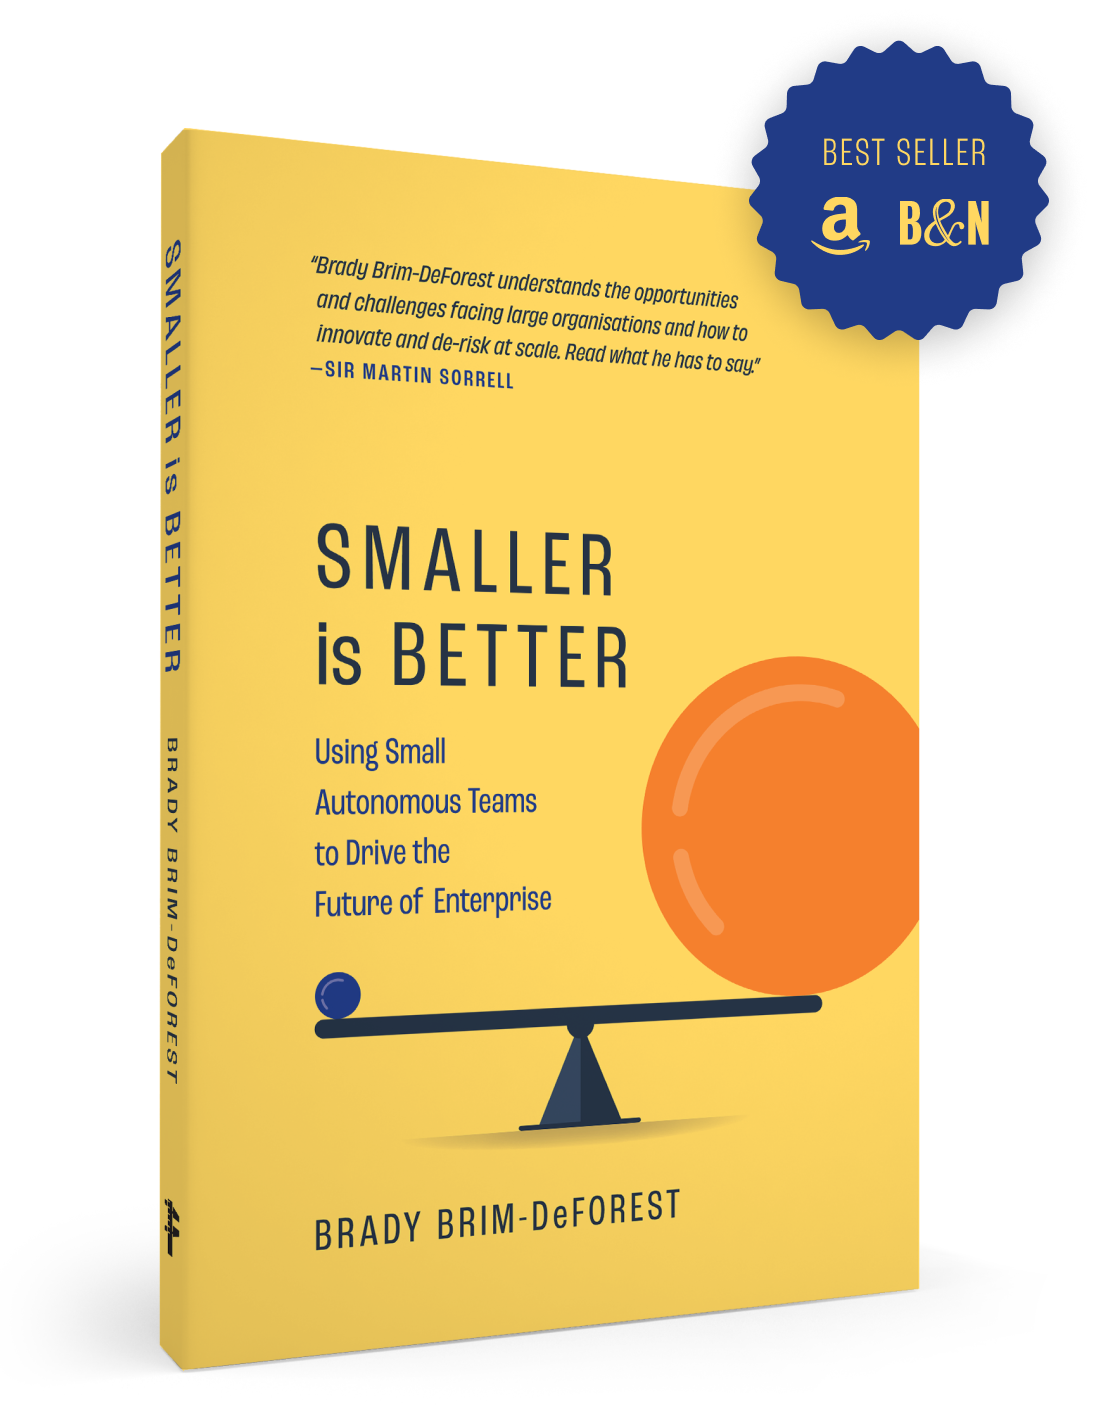 Book cover of 'Smaller is Better' by Brady Brim-DeForest with a balance scale graphic and a quote by Sir Martin Sorrell